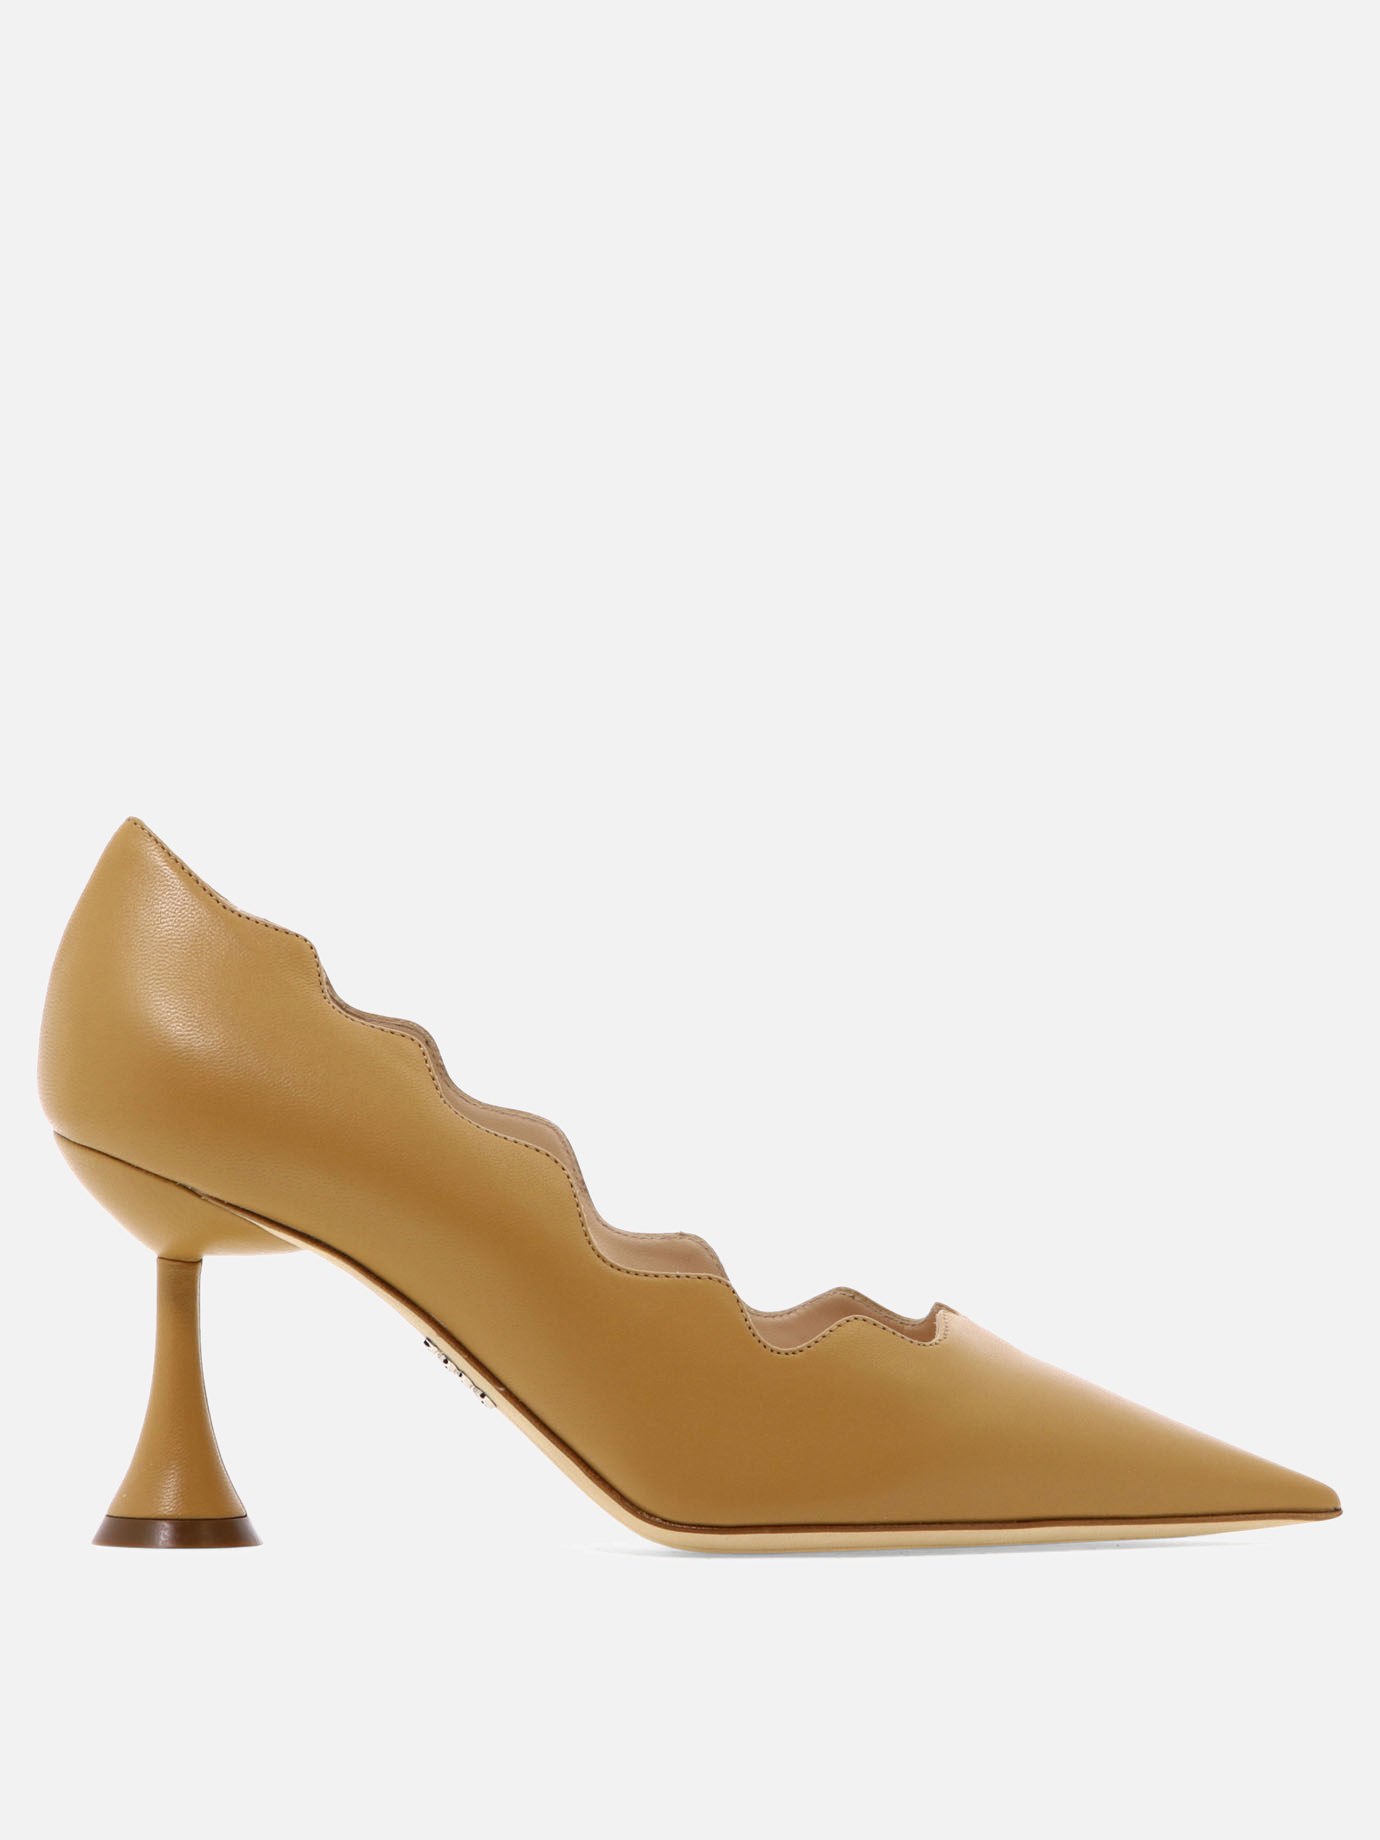 Shaped leather pumps